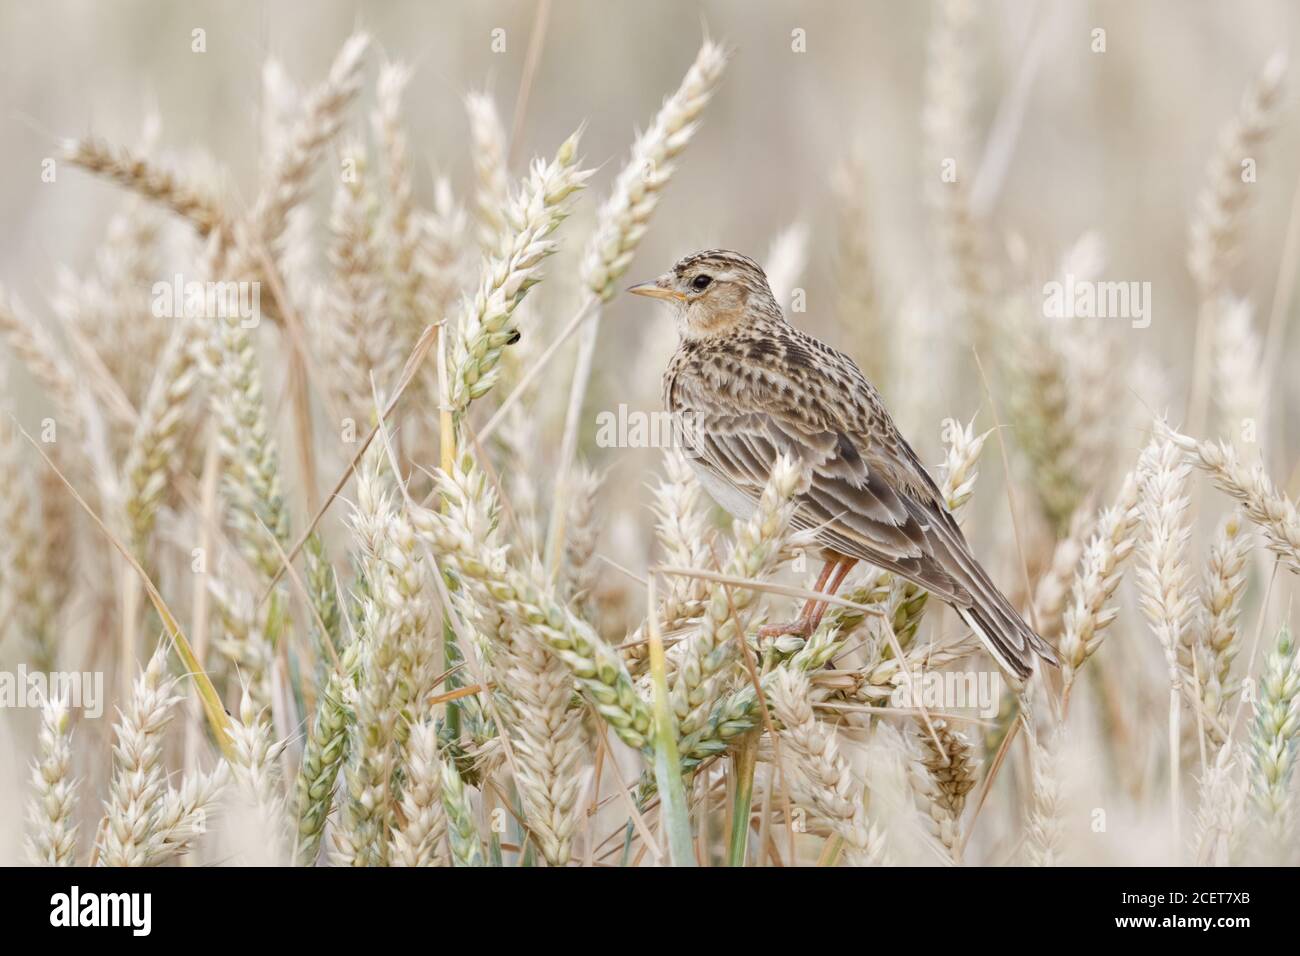 Skylark ( Alauda arvensis ) typical bird of open land, perched on wheat crops, sitting, resting in a ripe wheat field, watching, wildlife, Europe. Stock Photo